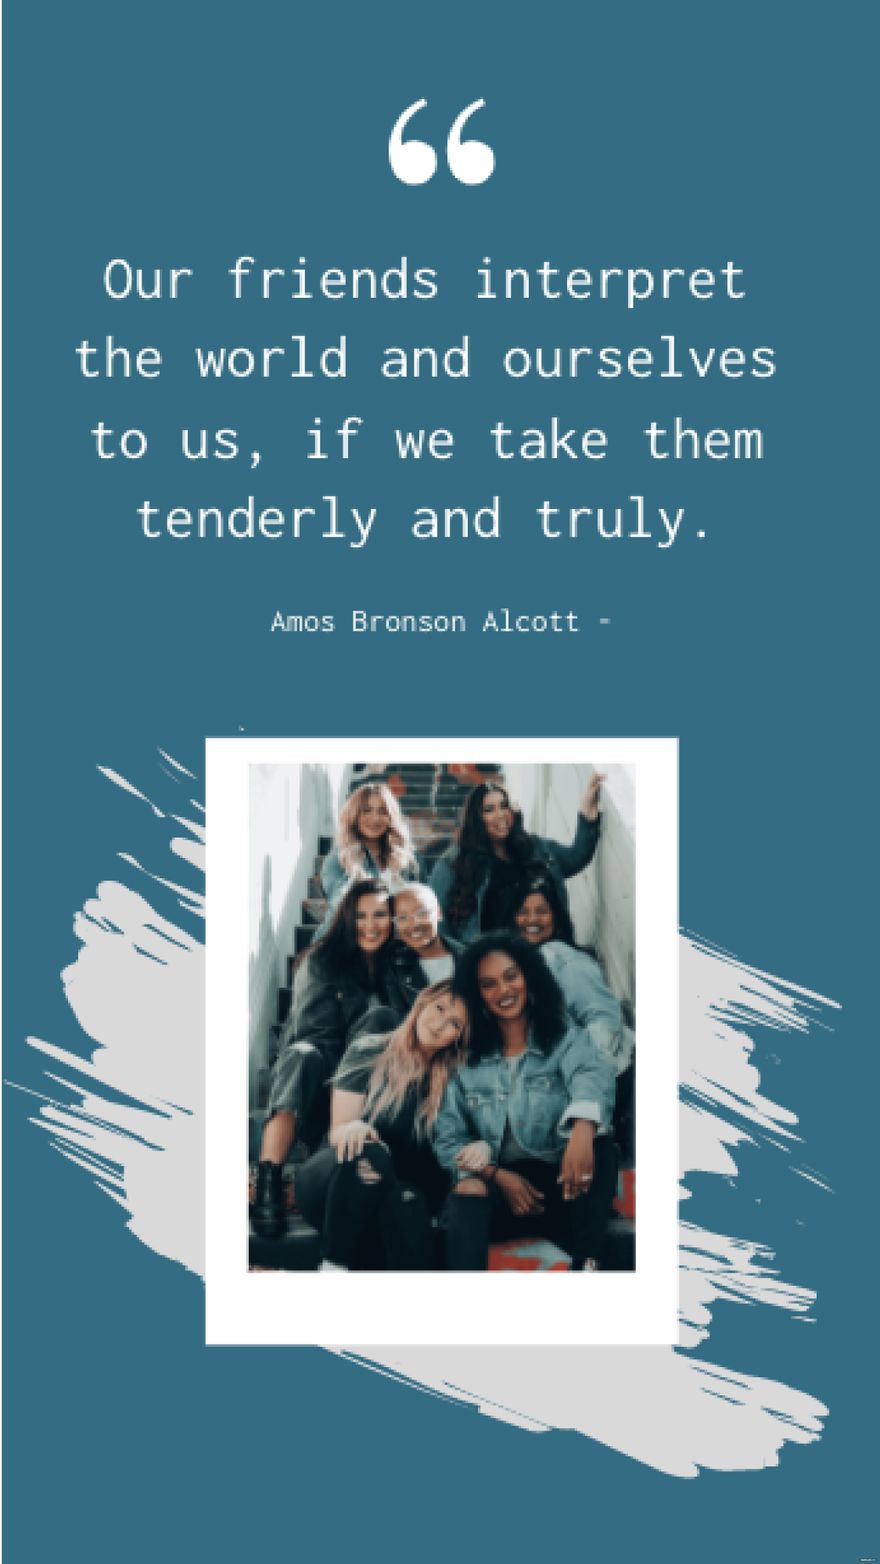 Amos Bronson Alcott - Our friends interpret the world and ourselves to us, if we take them tenderly and truly.